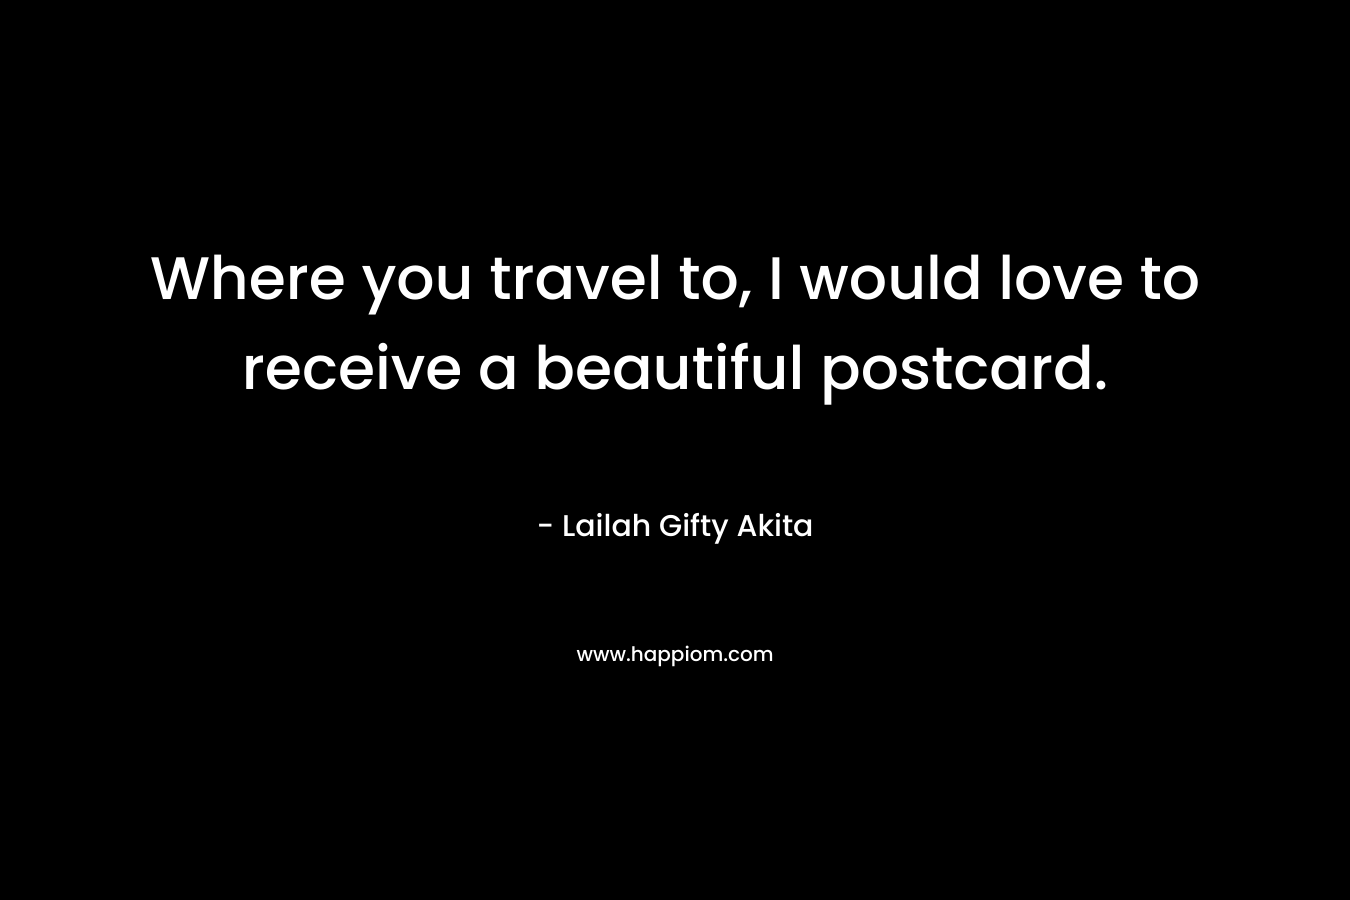 Where you travel to, I would love to receive a beautiful postcard.